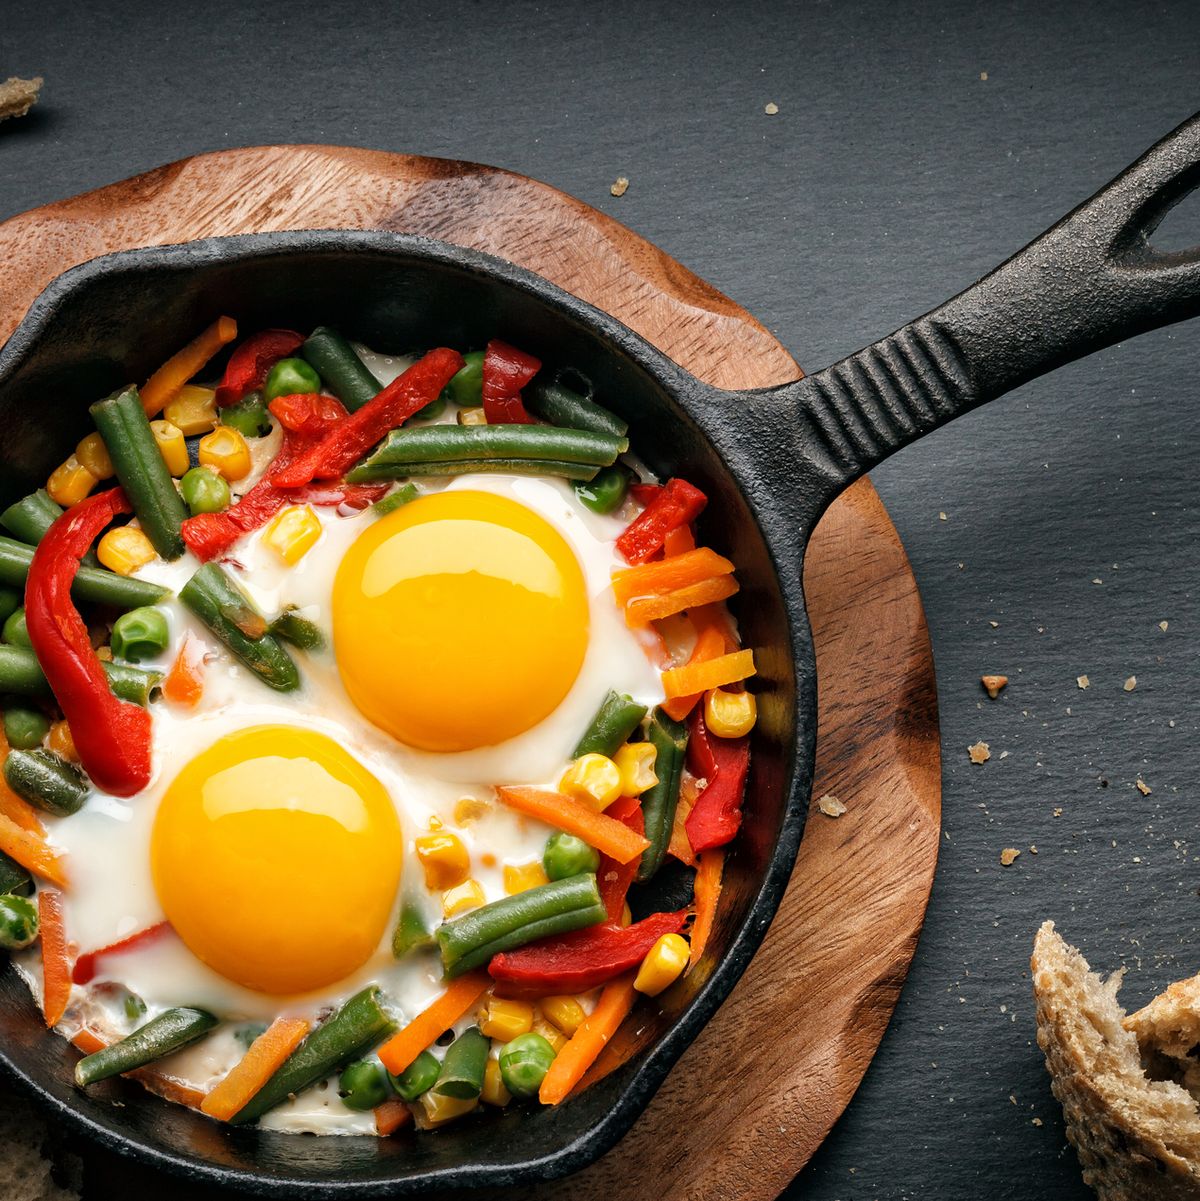 How to Season a Cast Iron Skillet to Make it Last Forever